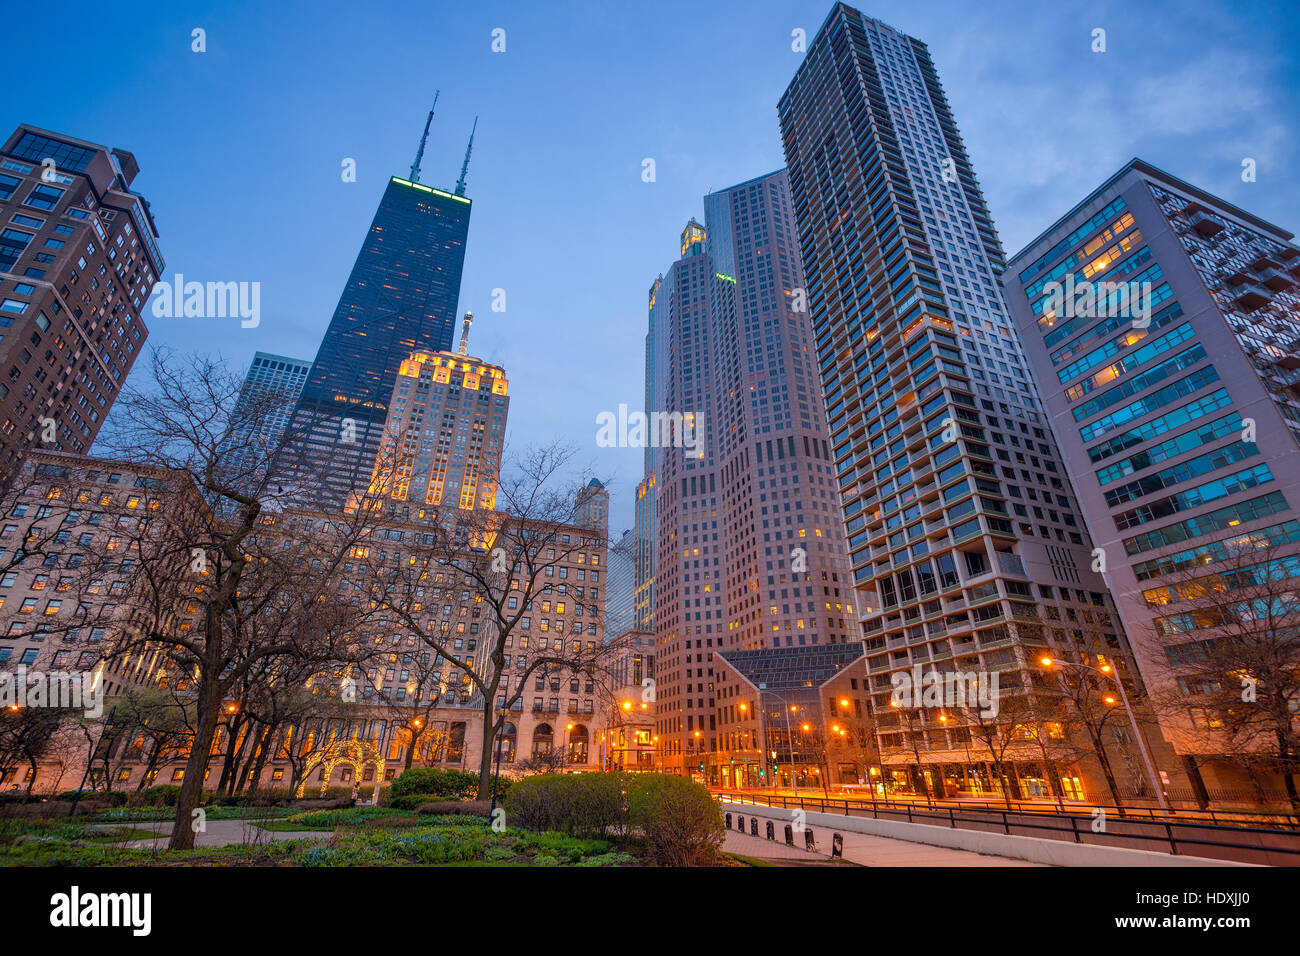 Chicago. Cityscape image of Chicago downtown with Michigan Avenue. Stock Photo